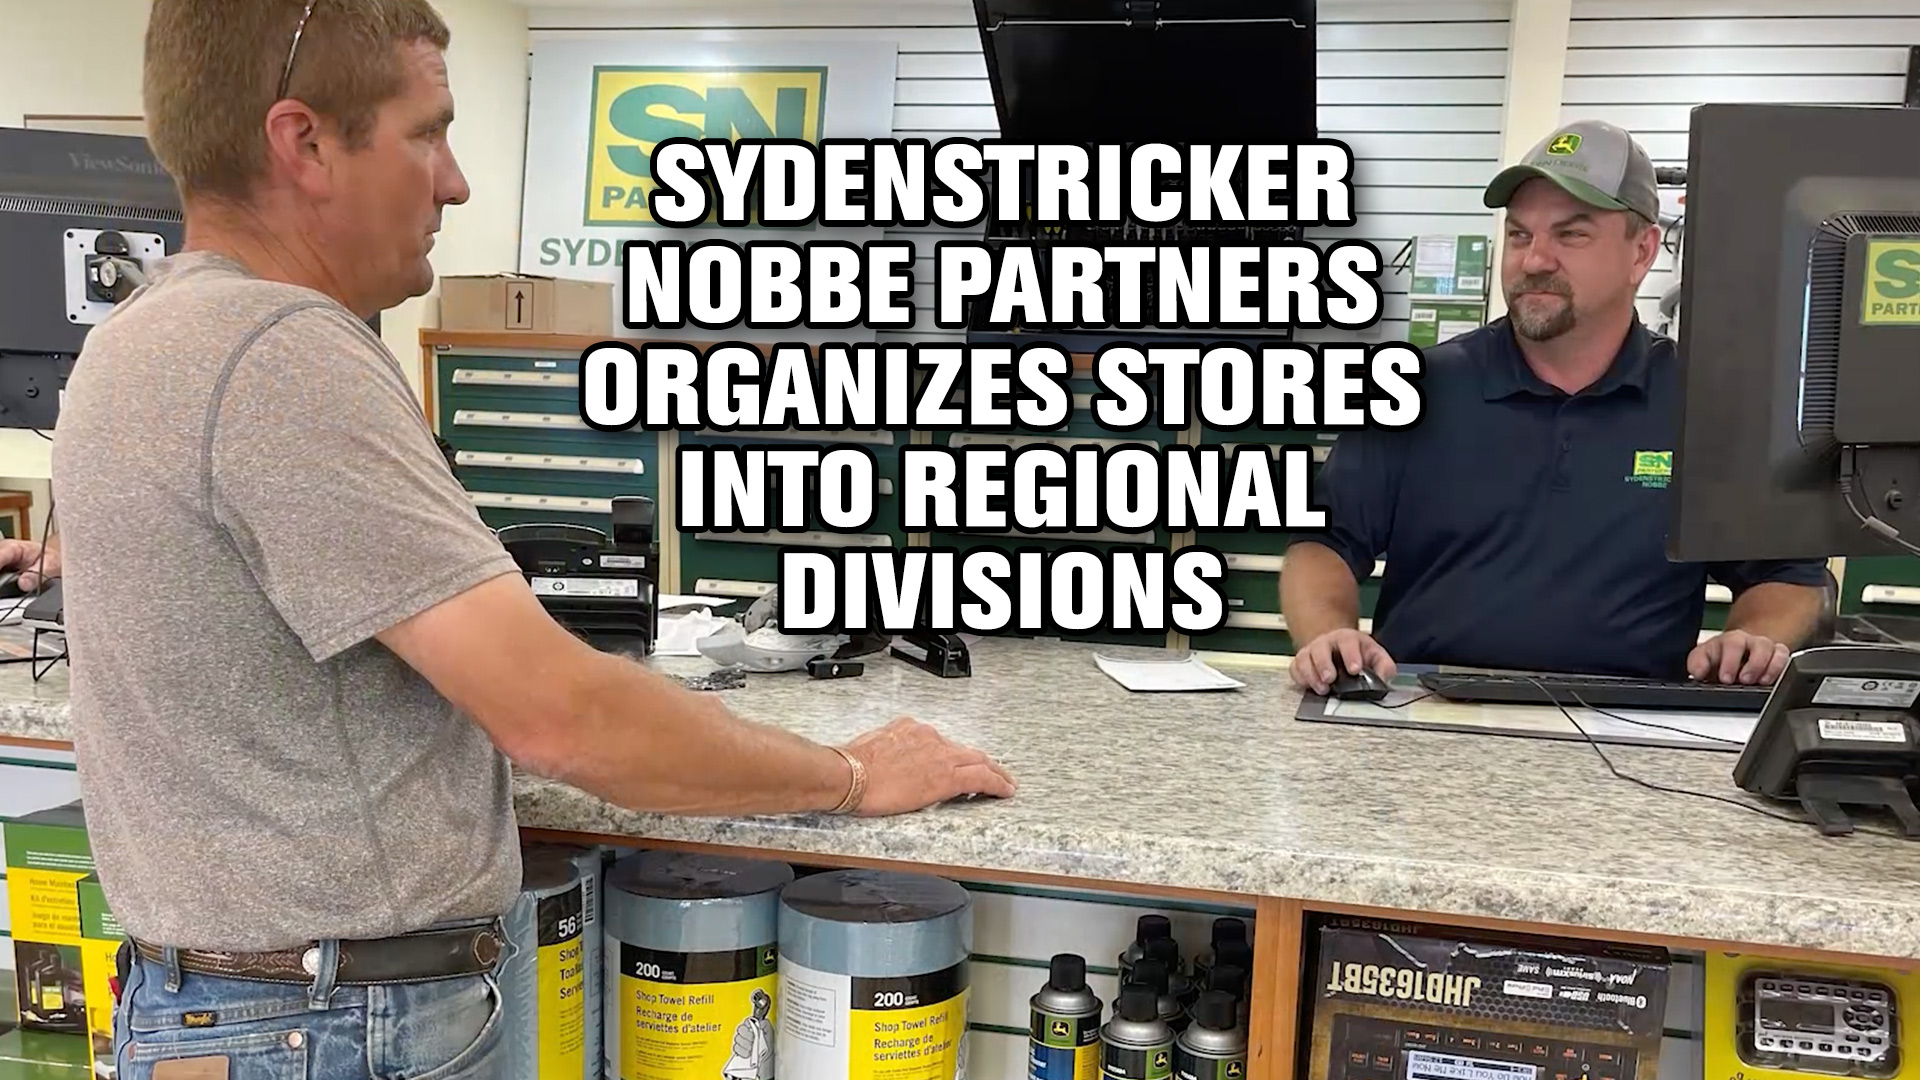 4-Sydenstricker-Nobbe-Partners-Organizes-Stores-into-Regional-Divisions.jpg